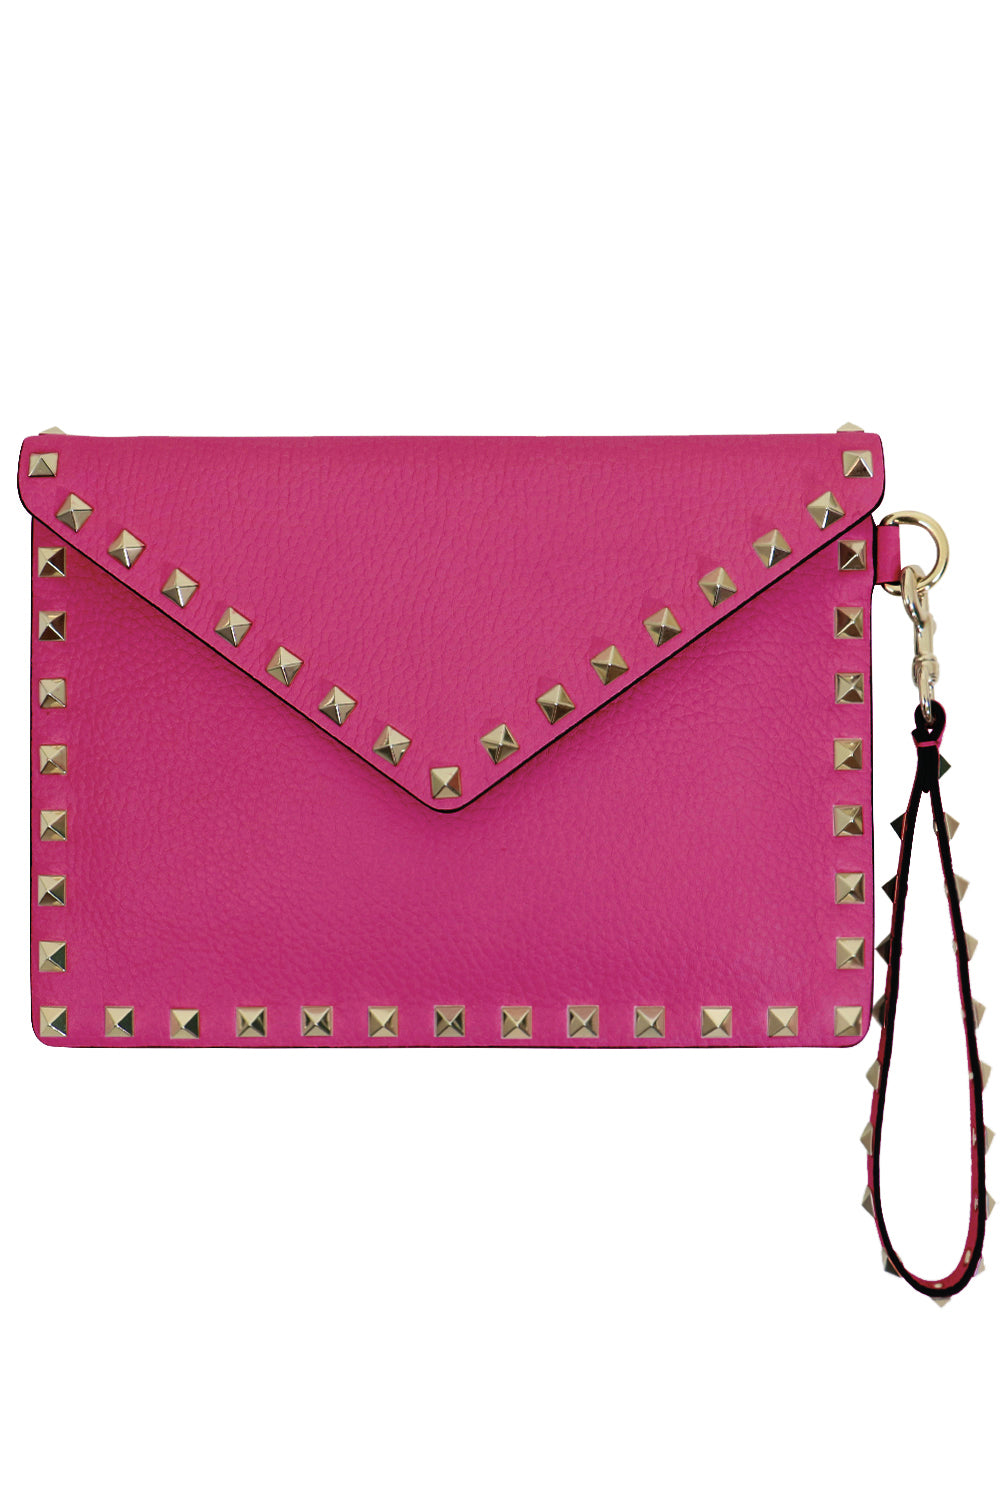 VALENTINO SMALL ROCKSTUD ENVELOPE POUCH GRAINED ROSE VIOLET – Parlour X